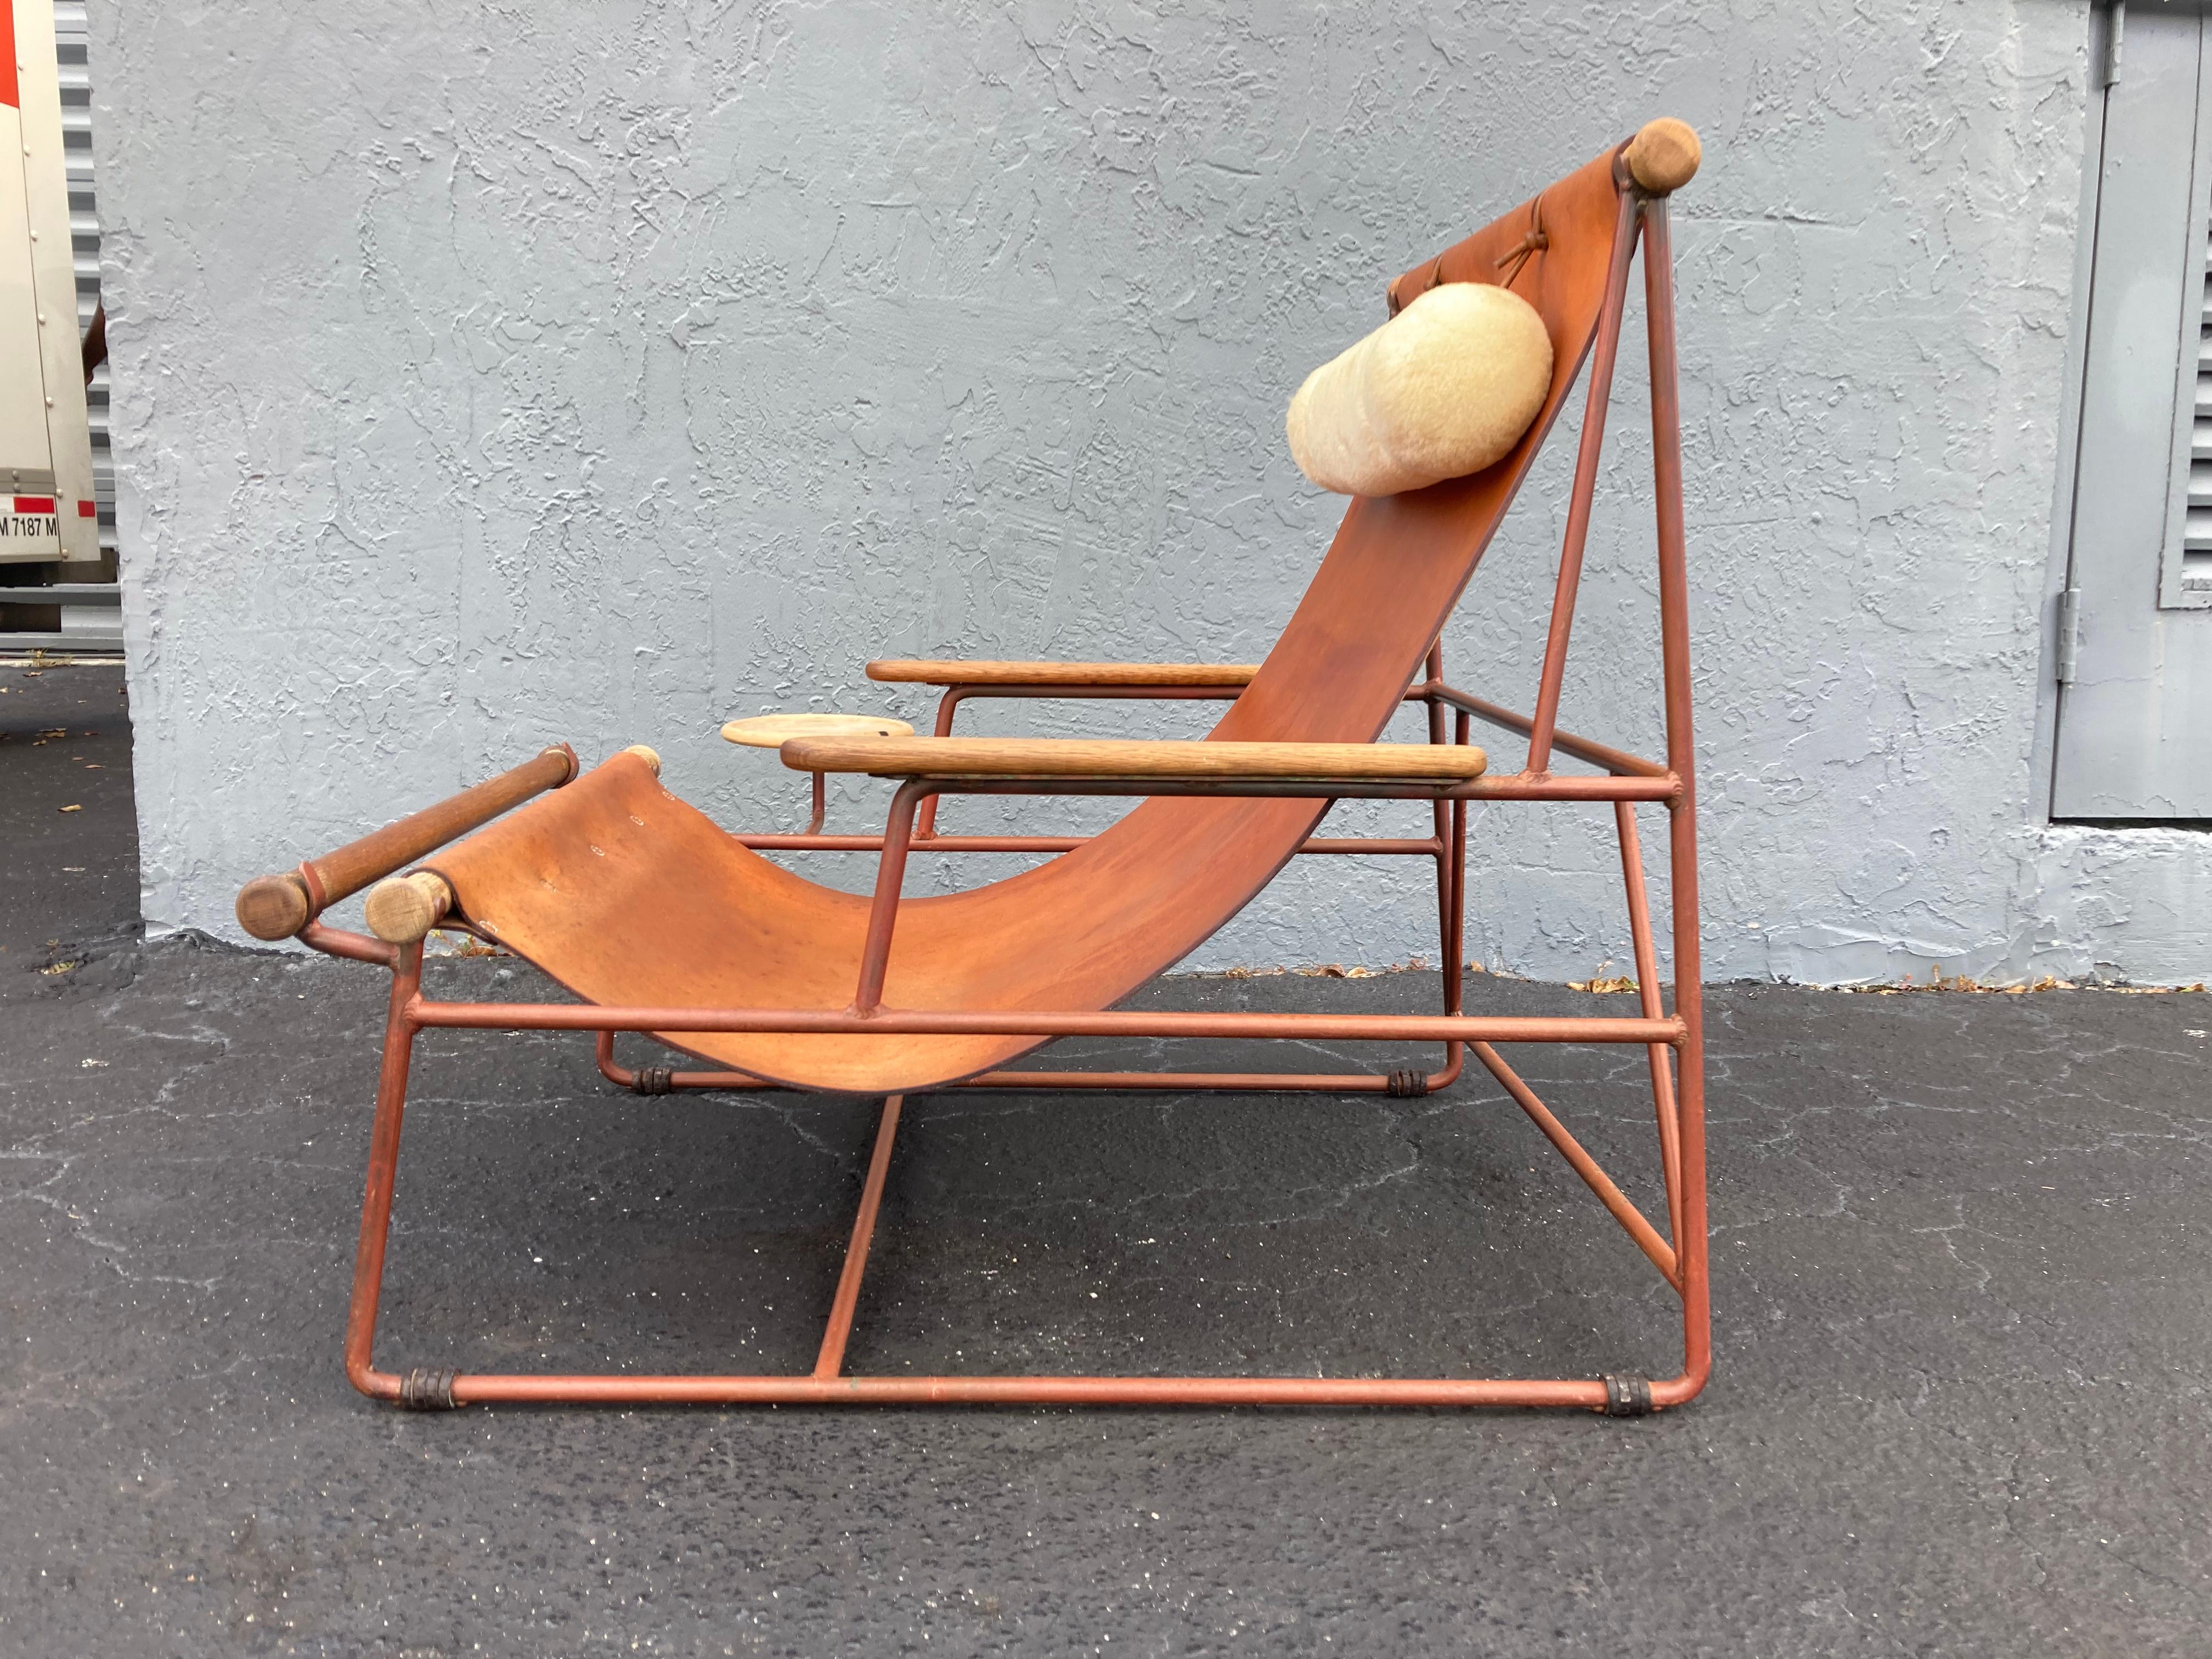 Beautiful Deck Lounge Chair Designed by Tyler Hays and Made by BDDW, Leather 4